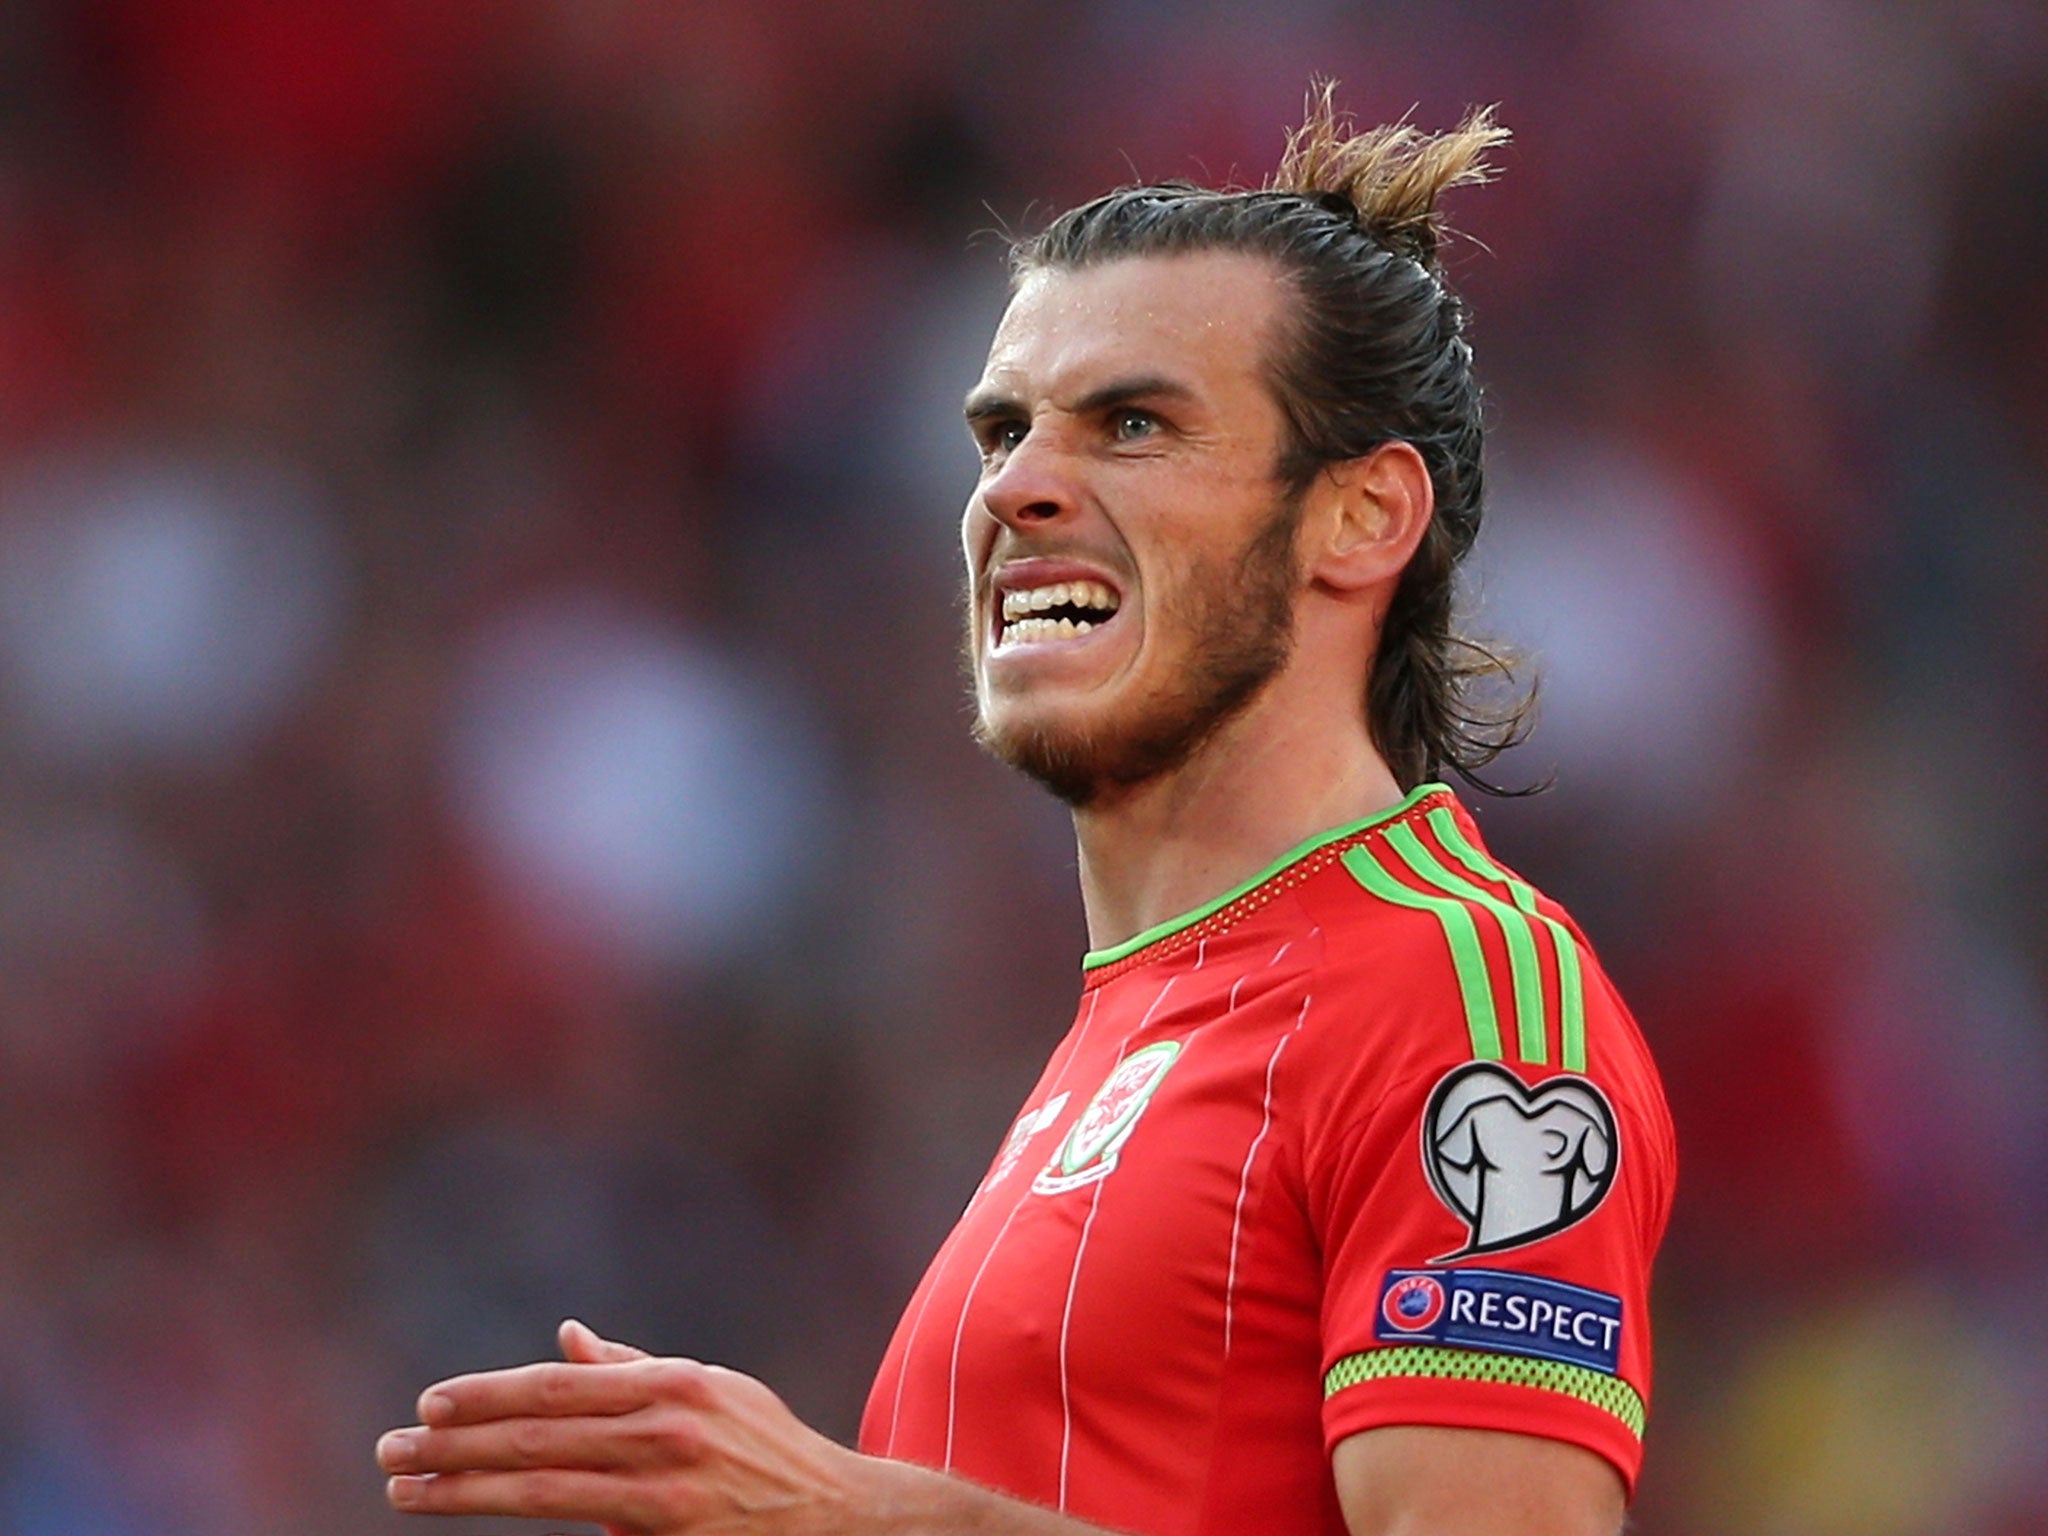 Gareth Bale reacts to a missed chance